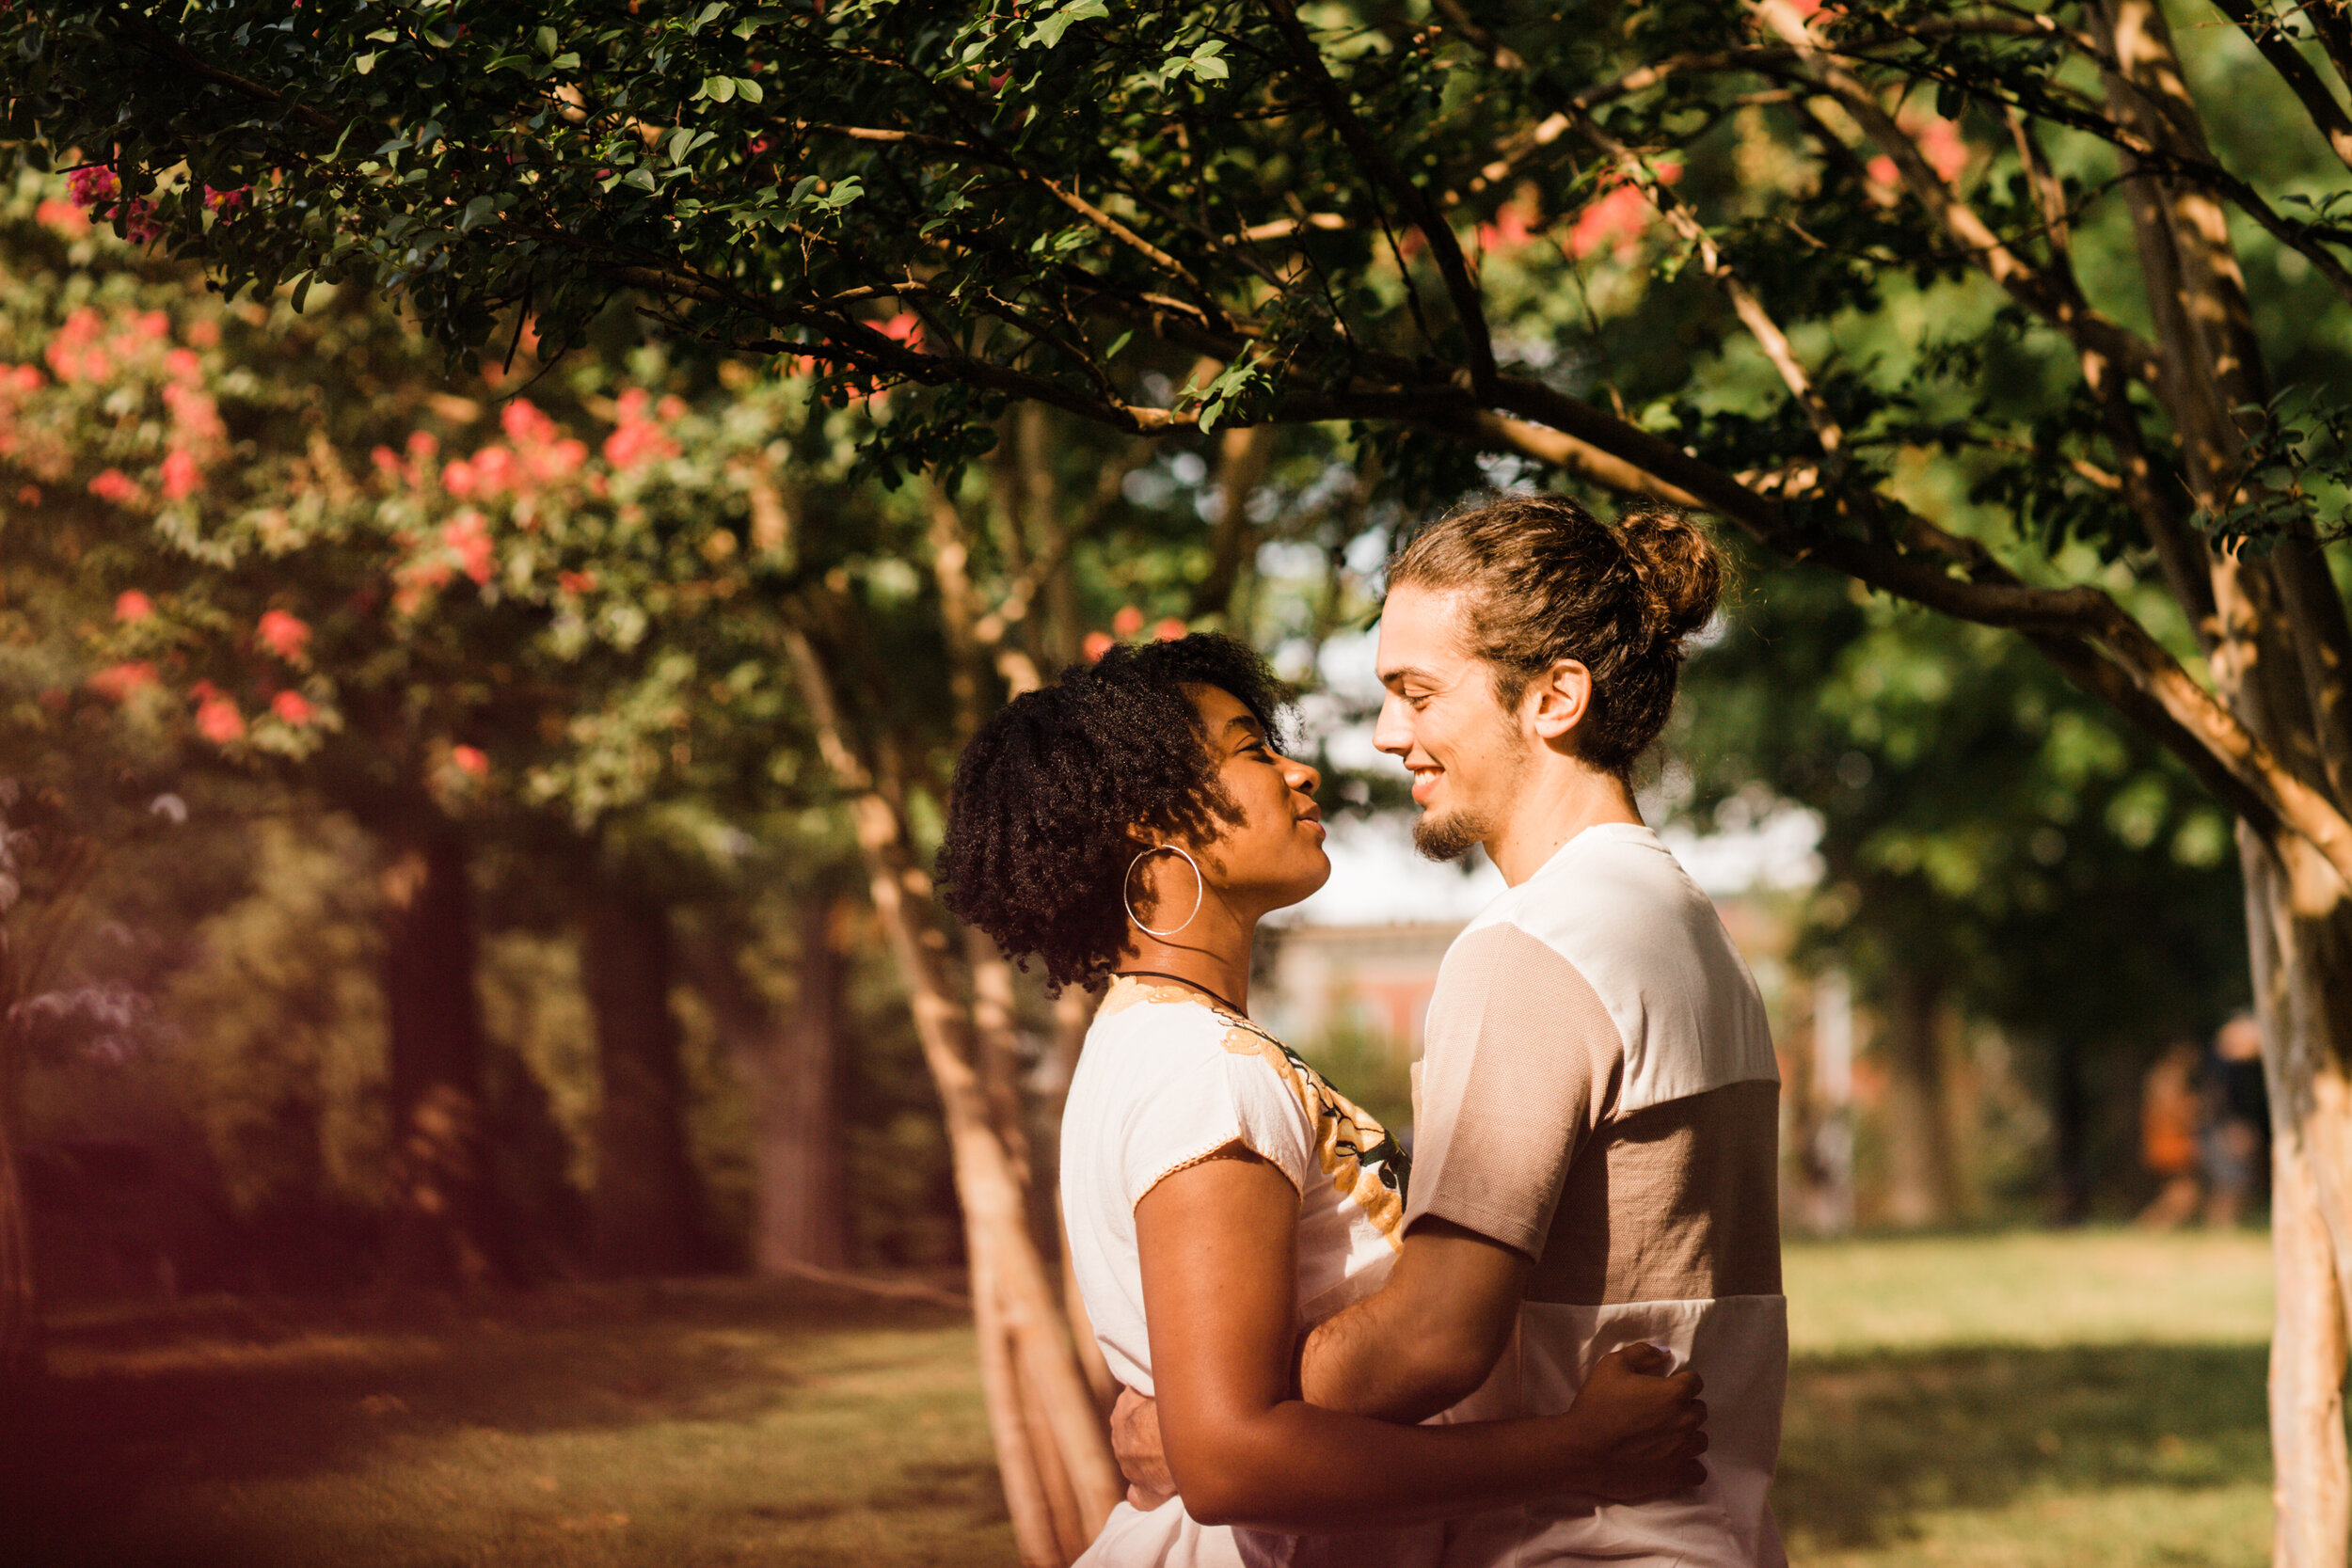 Golden Hour Engagement Session in Baltimore Maryland Patterson Park Pagoda DC Wedding Photographers Megapixels Media Photography and Videography Mixed Couple Multiracial Bride and Groom-39.jpg